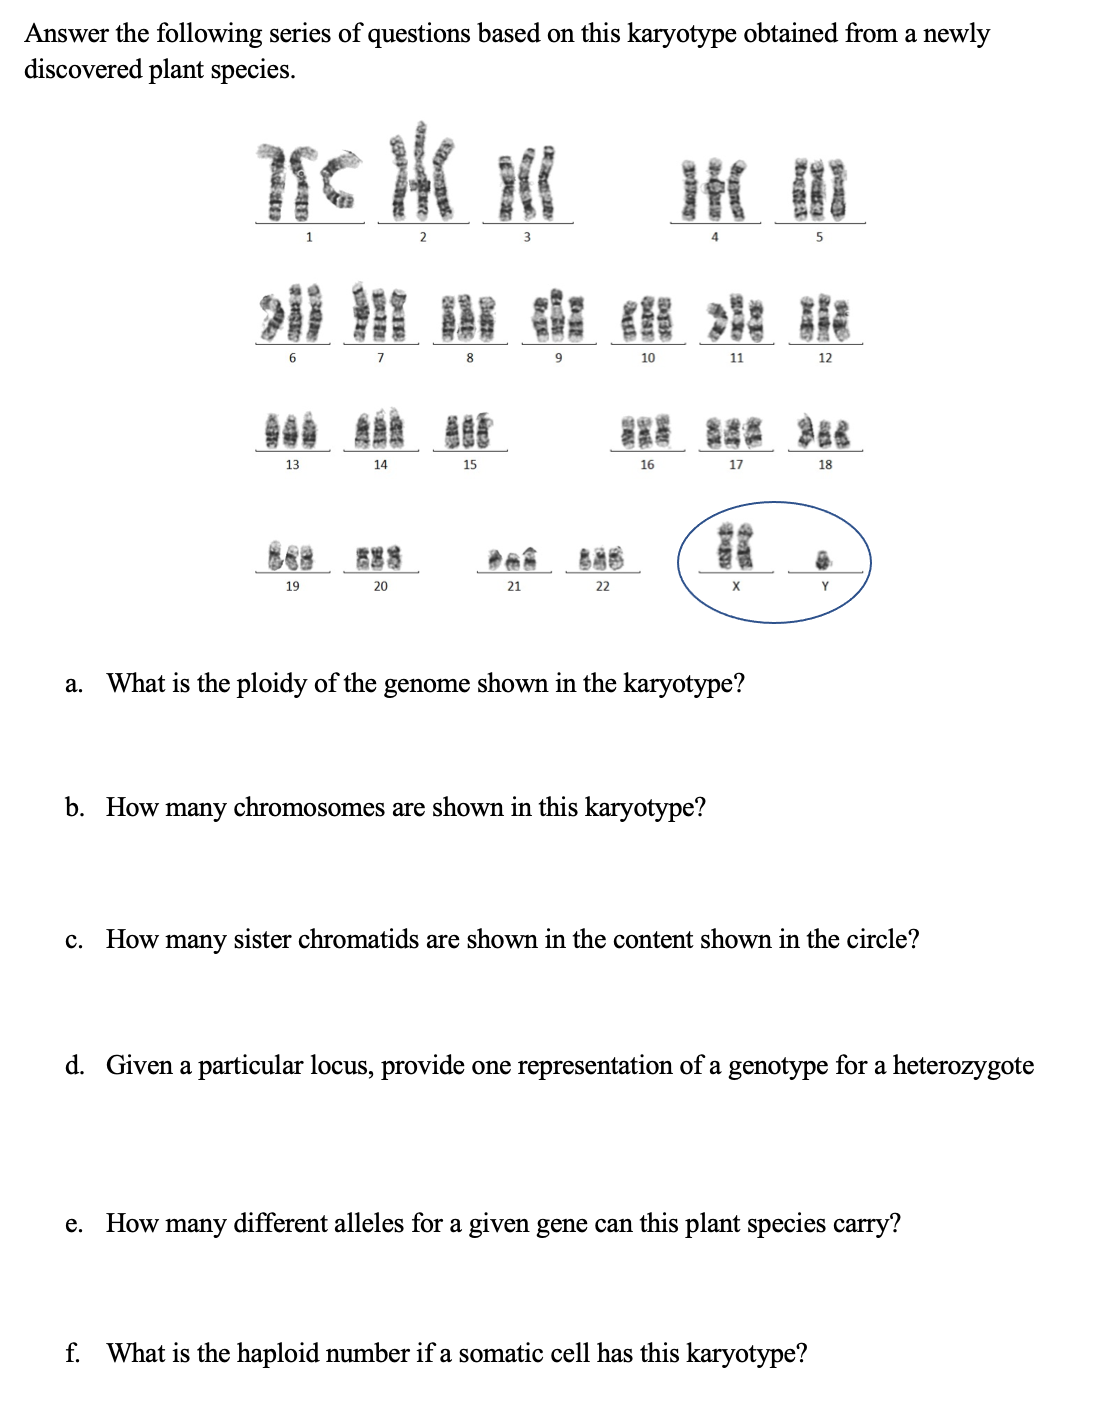 Answer the following series of questions based on this karyotype obtained from a newly
discovered plant species.
6
7
10
11
12
自 0
13
14
15
16
17
18
19
20
21
22
а.
What is the ploidy of the genome shown in the karyotype?
b. How many chromosomes are shown in this karyotype?
c. How many sister chromatids are shown in the content shown in the circle?
d. Given a particular locus, provide one representation of a genotype for a heterozygote
e. How many different alleles for a given gene can this plant species carry?
f. What is the haploid number if a somatic cell has this karyotype?
摩
